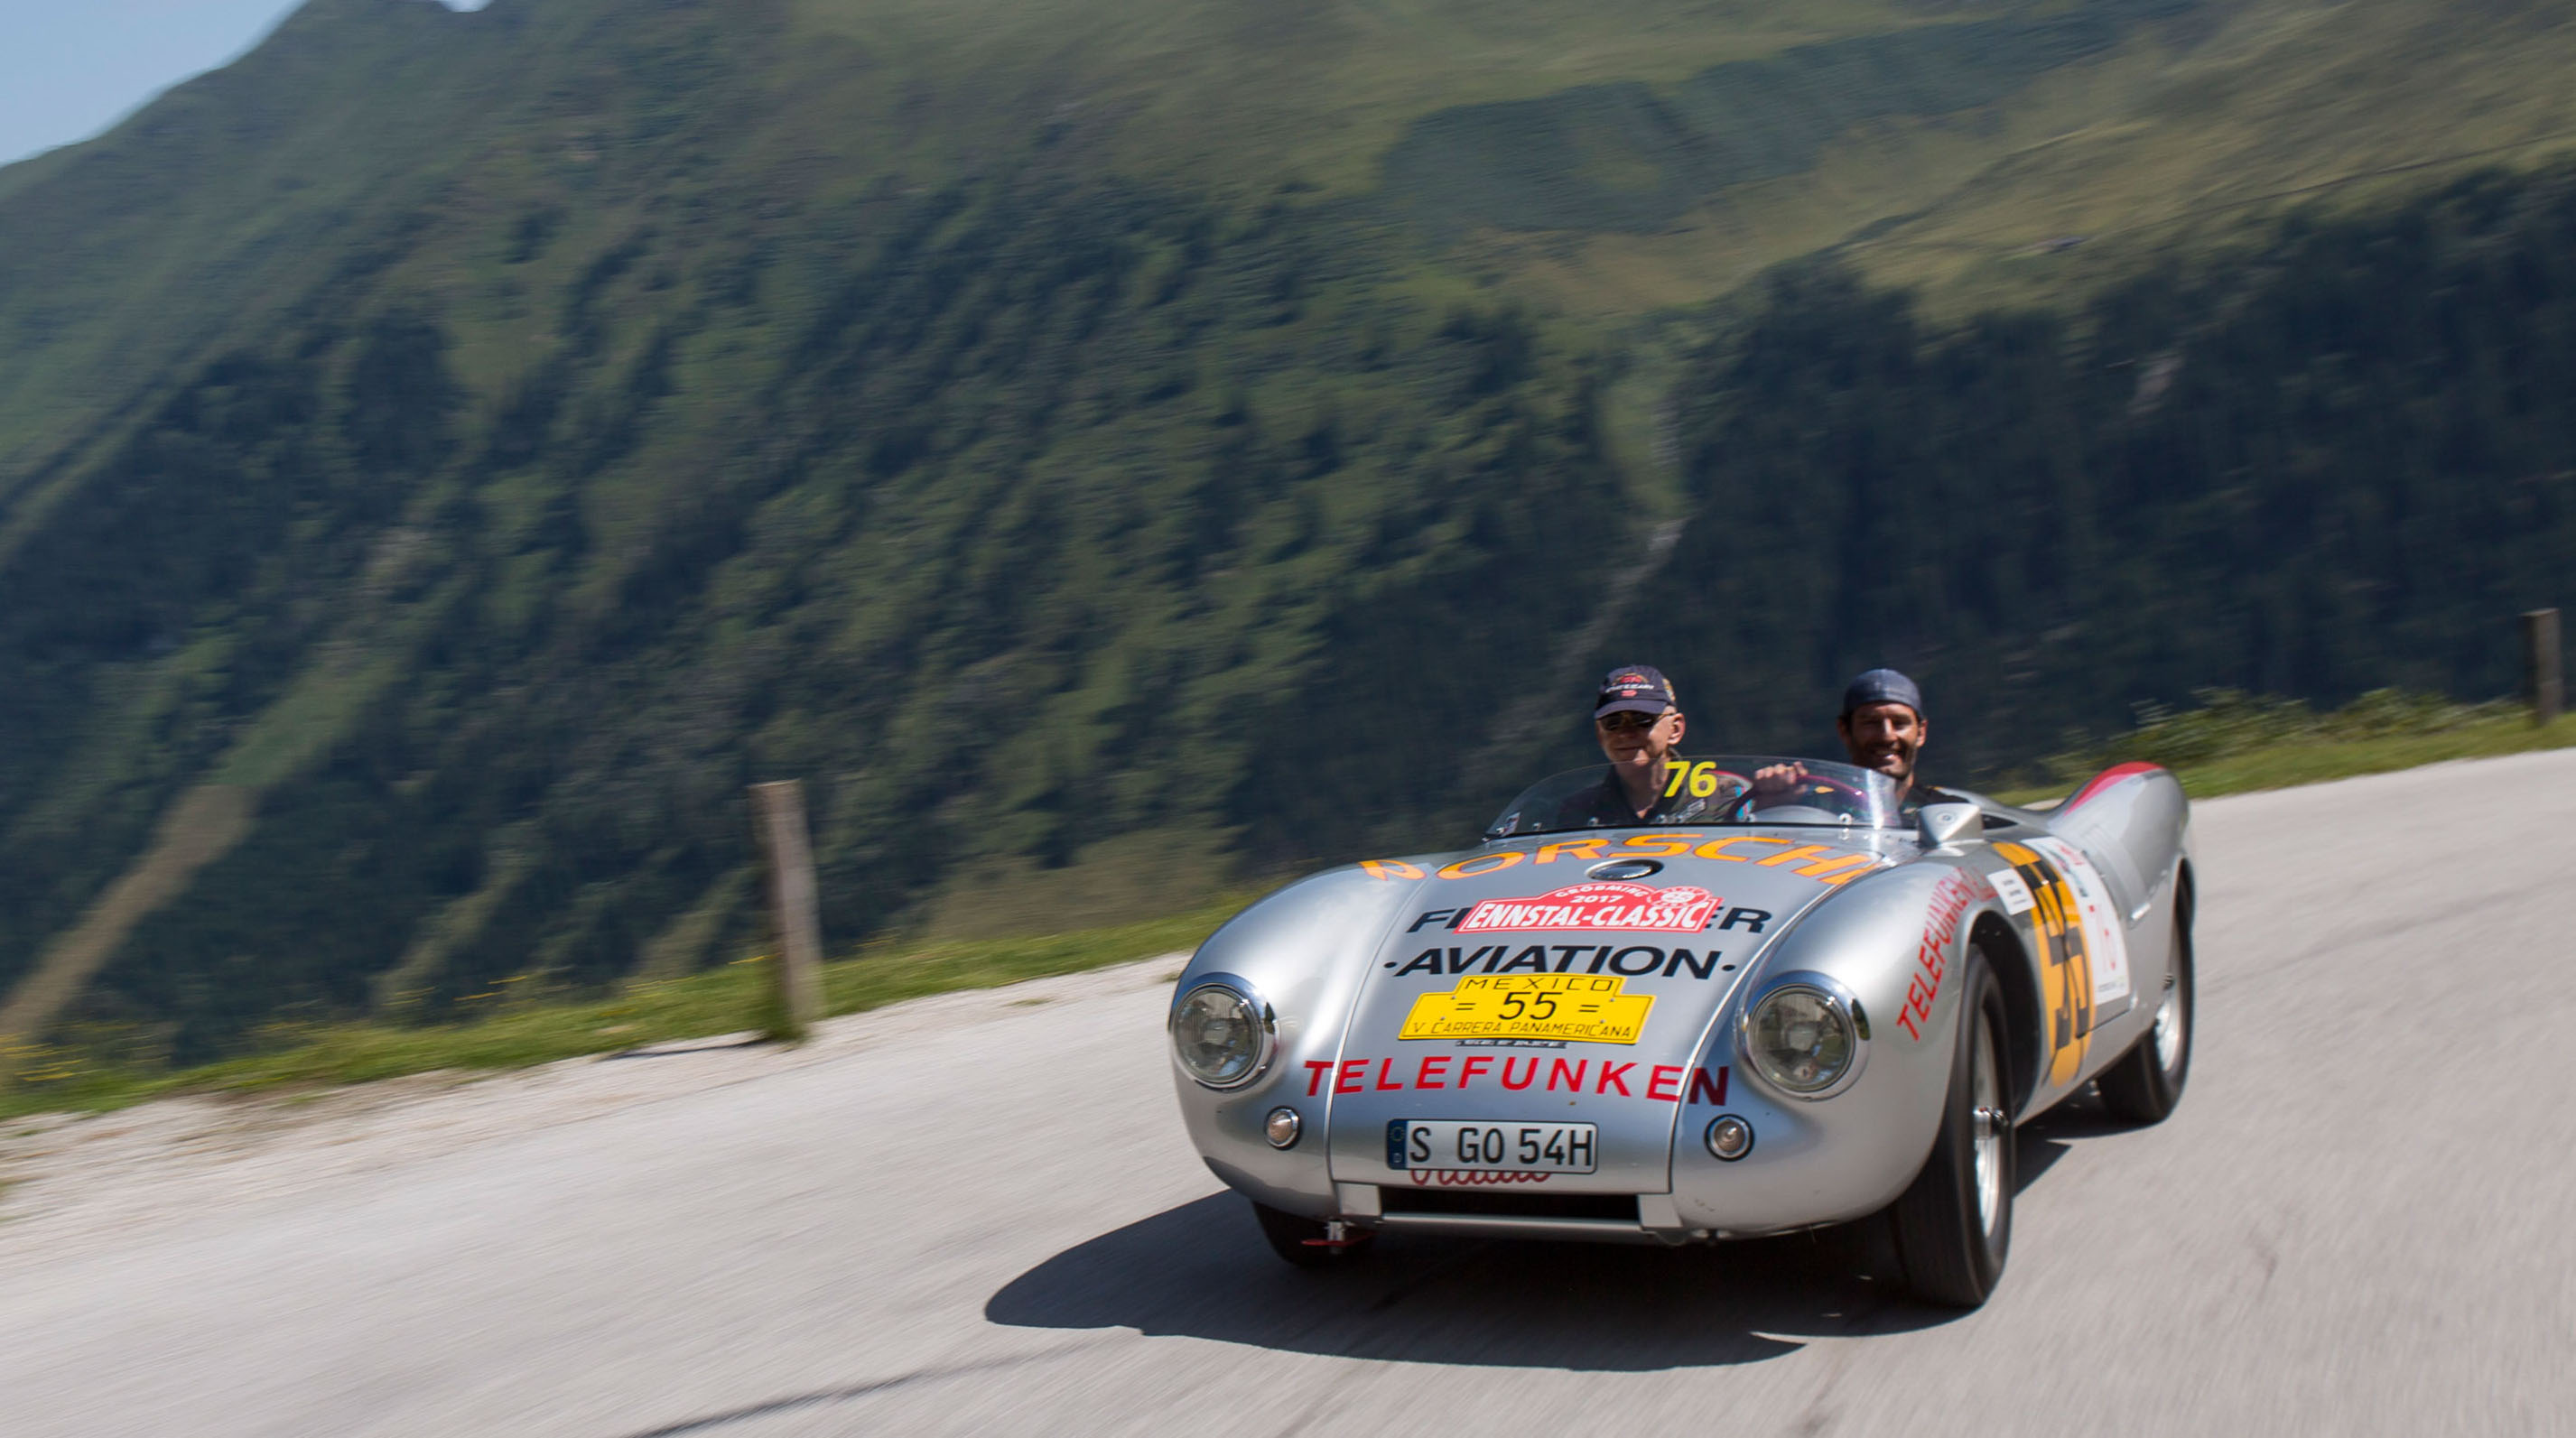 Silver Porsche 550 Spyder with original racing livery on road